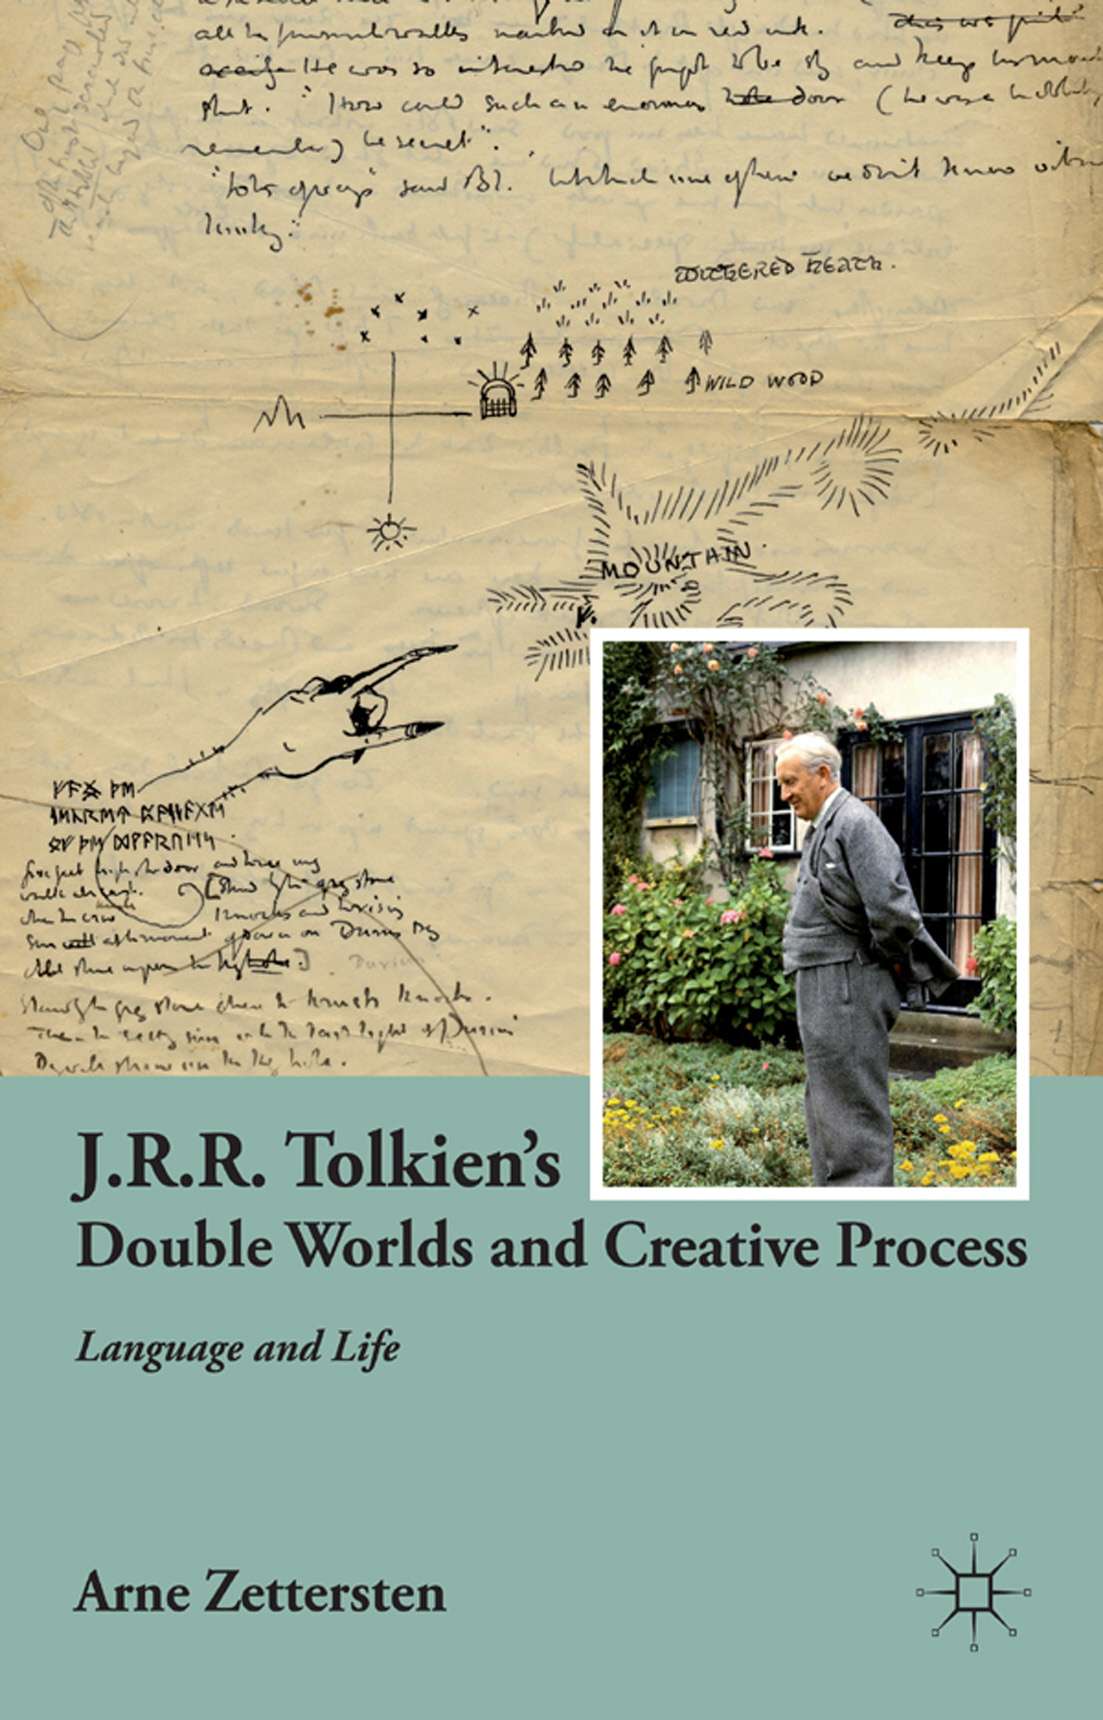 J.R.R. Tolkien’s Double Worlds and Creative Process